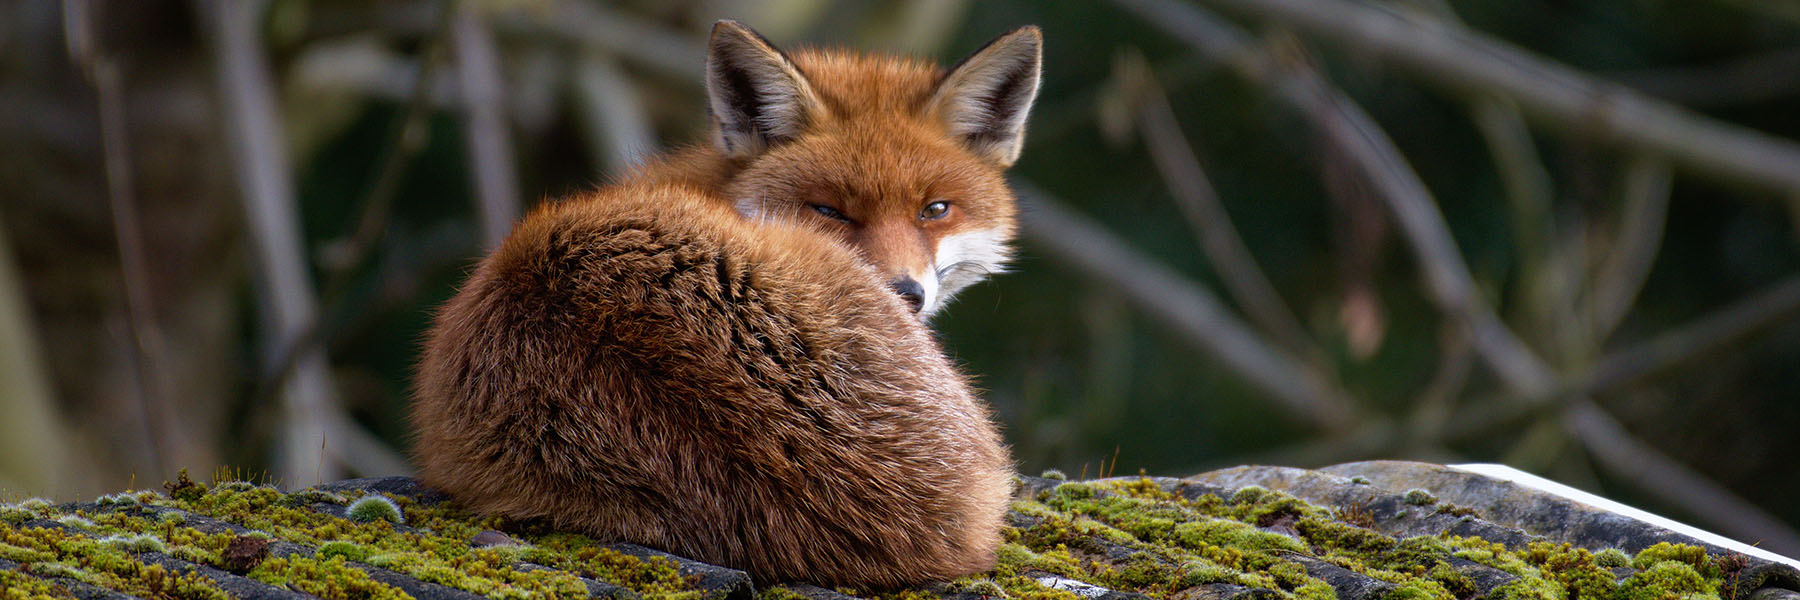 A red fox kit winking at the camera in the Firefox pose.